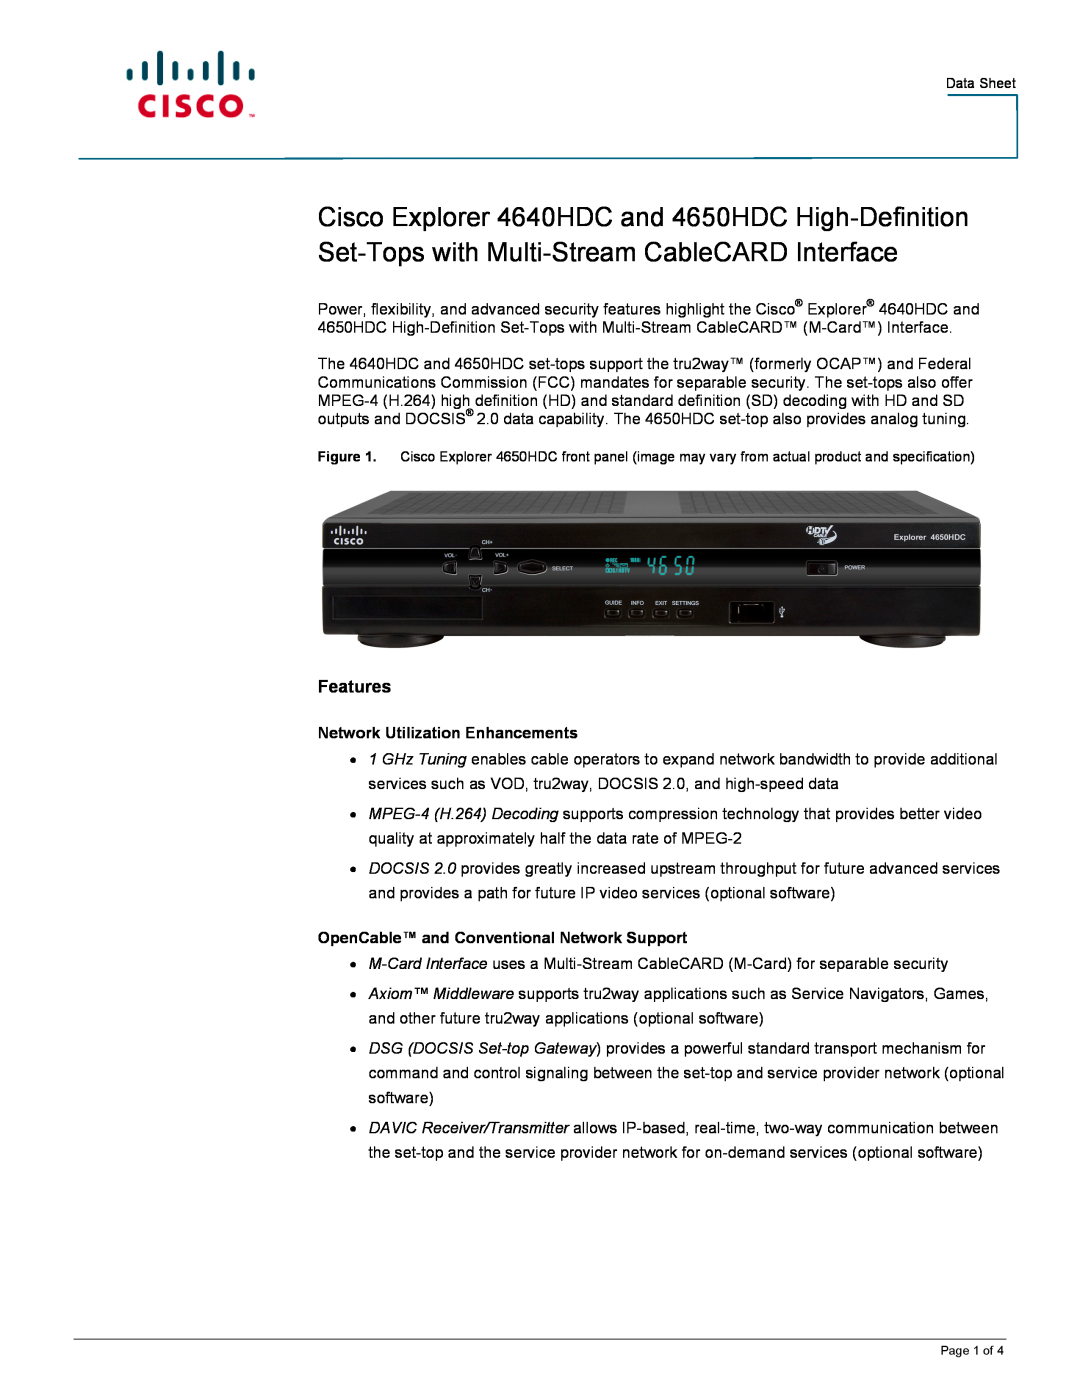 Cisco Systems 4640HDC manual Features, Network Utilization Enhancements, OpenCable and Conventional Network Support 